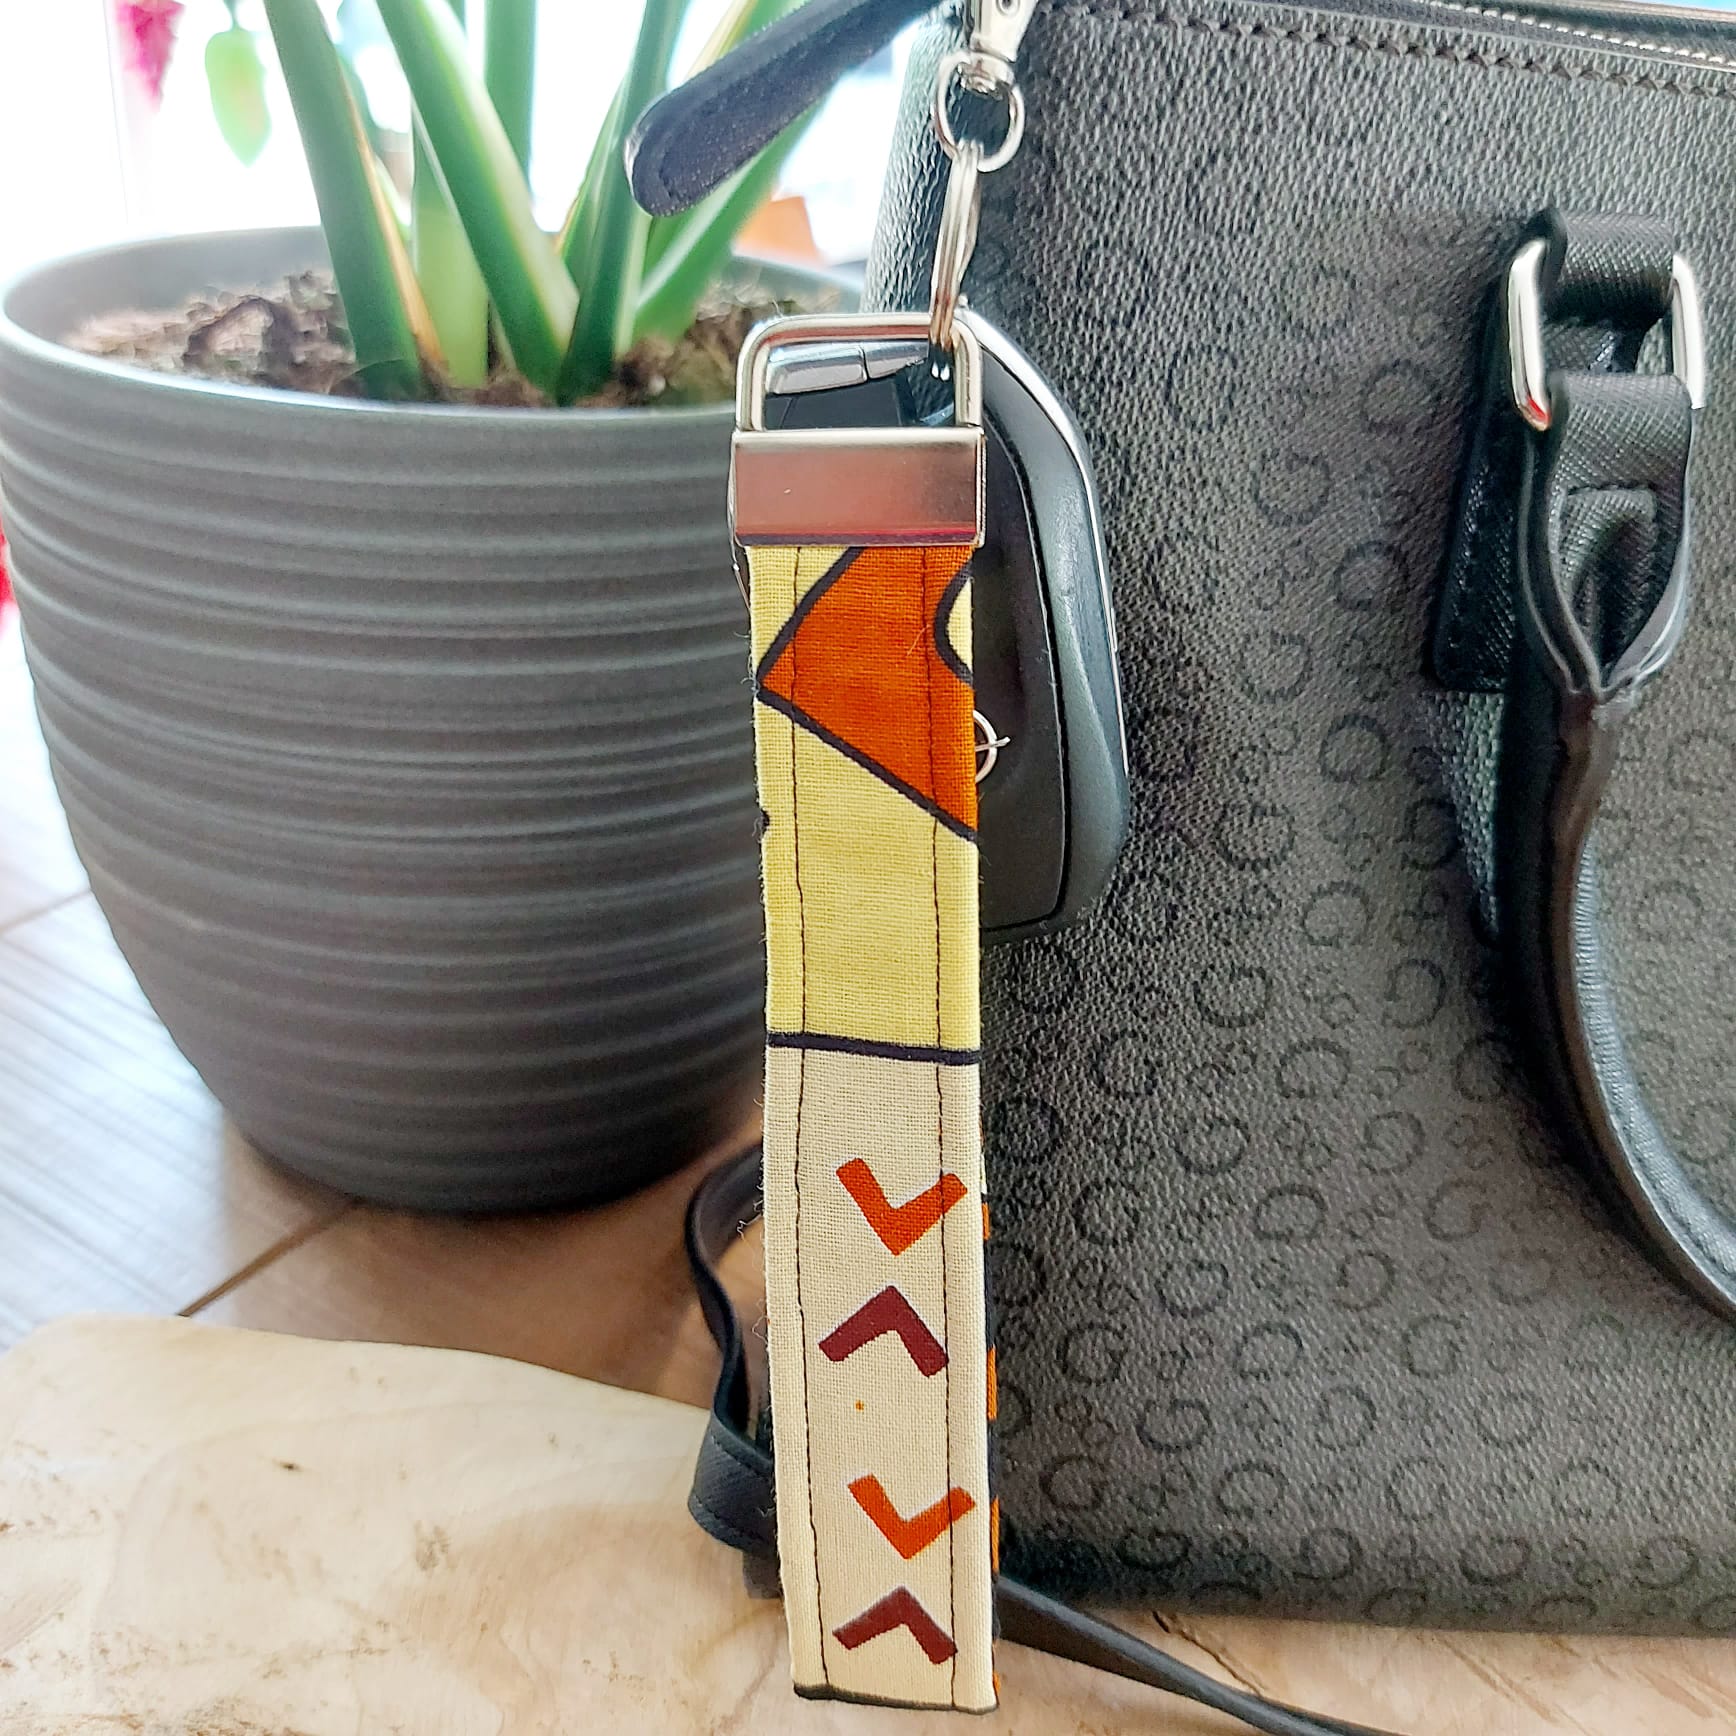 African Print and Leather Key Fob, Wristlet